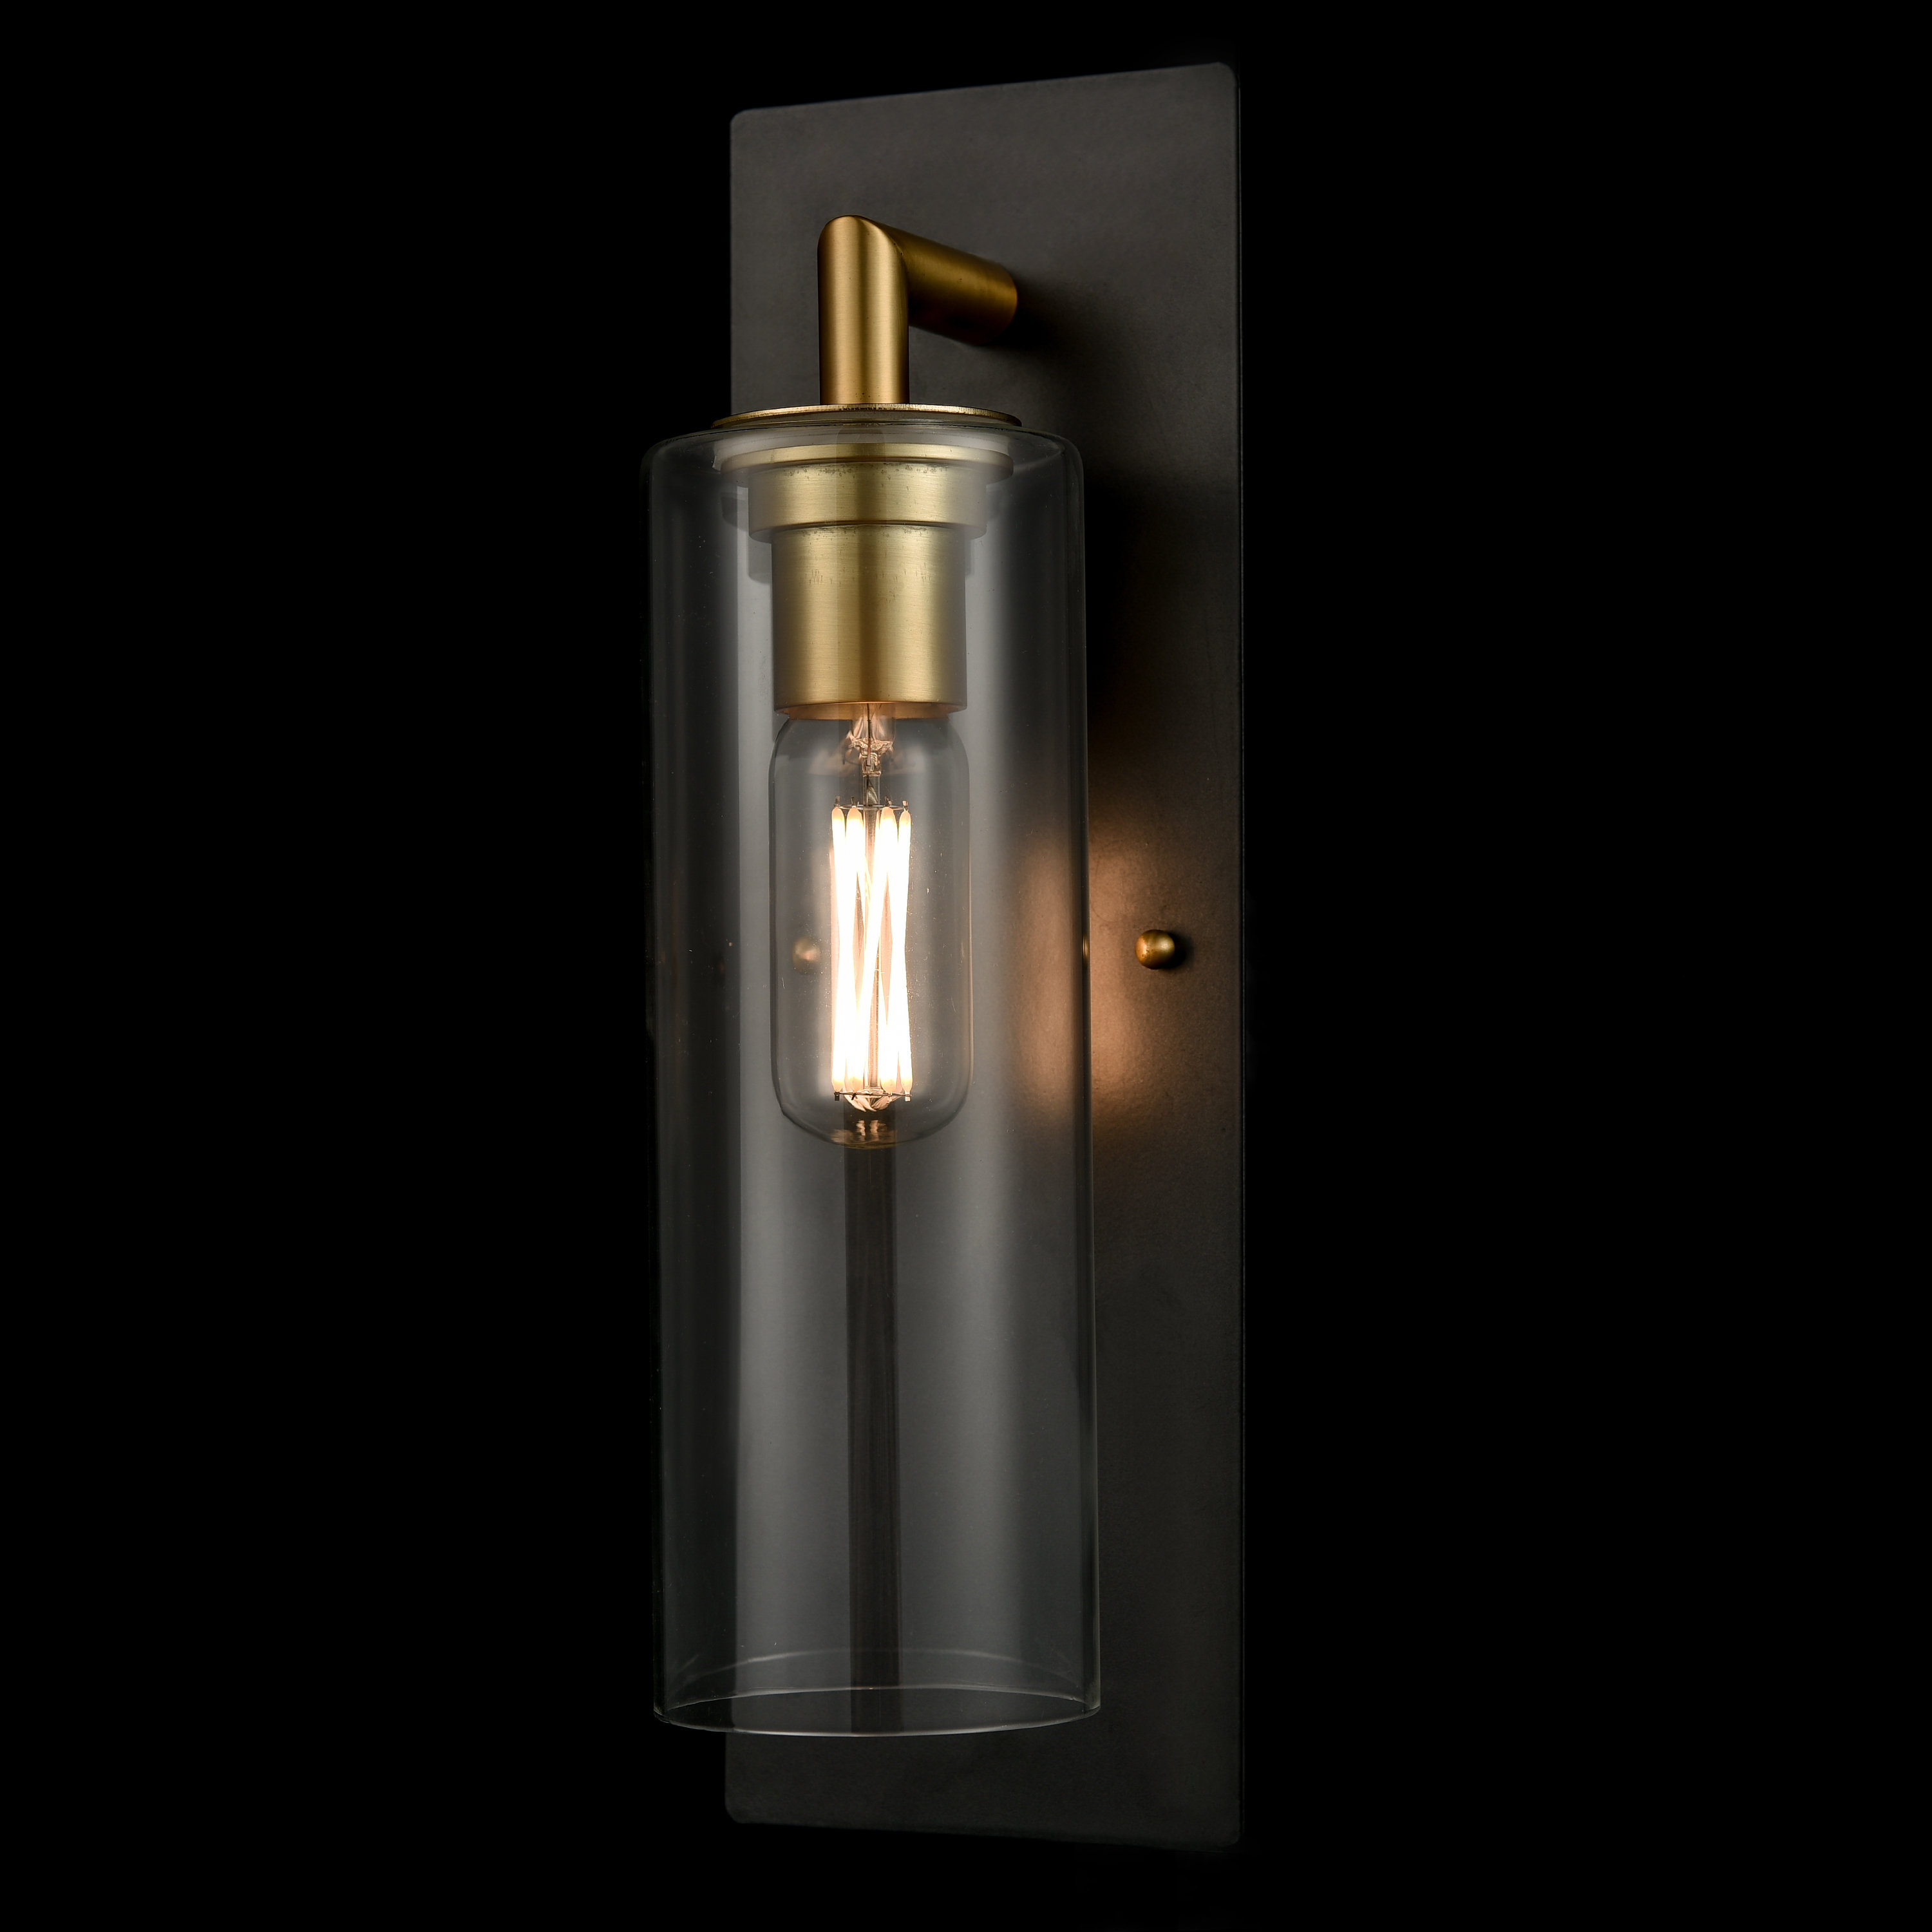 Lanning 1 Light Armed Wall Sconce